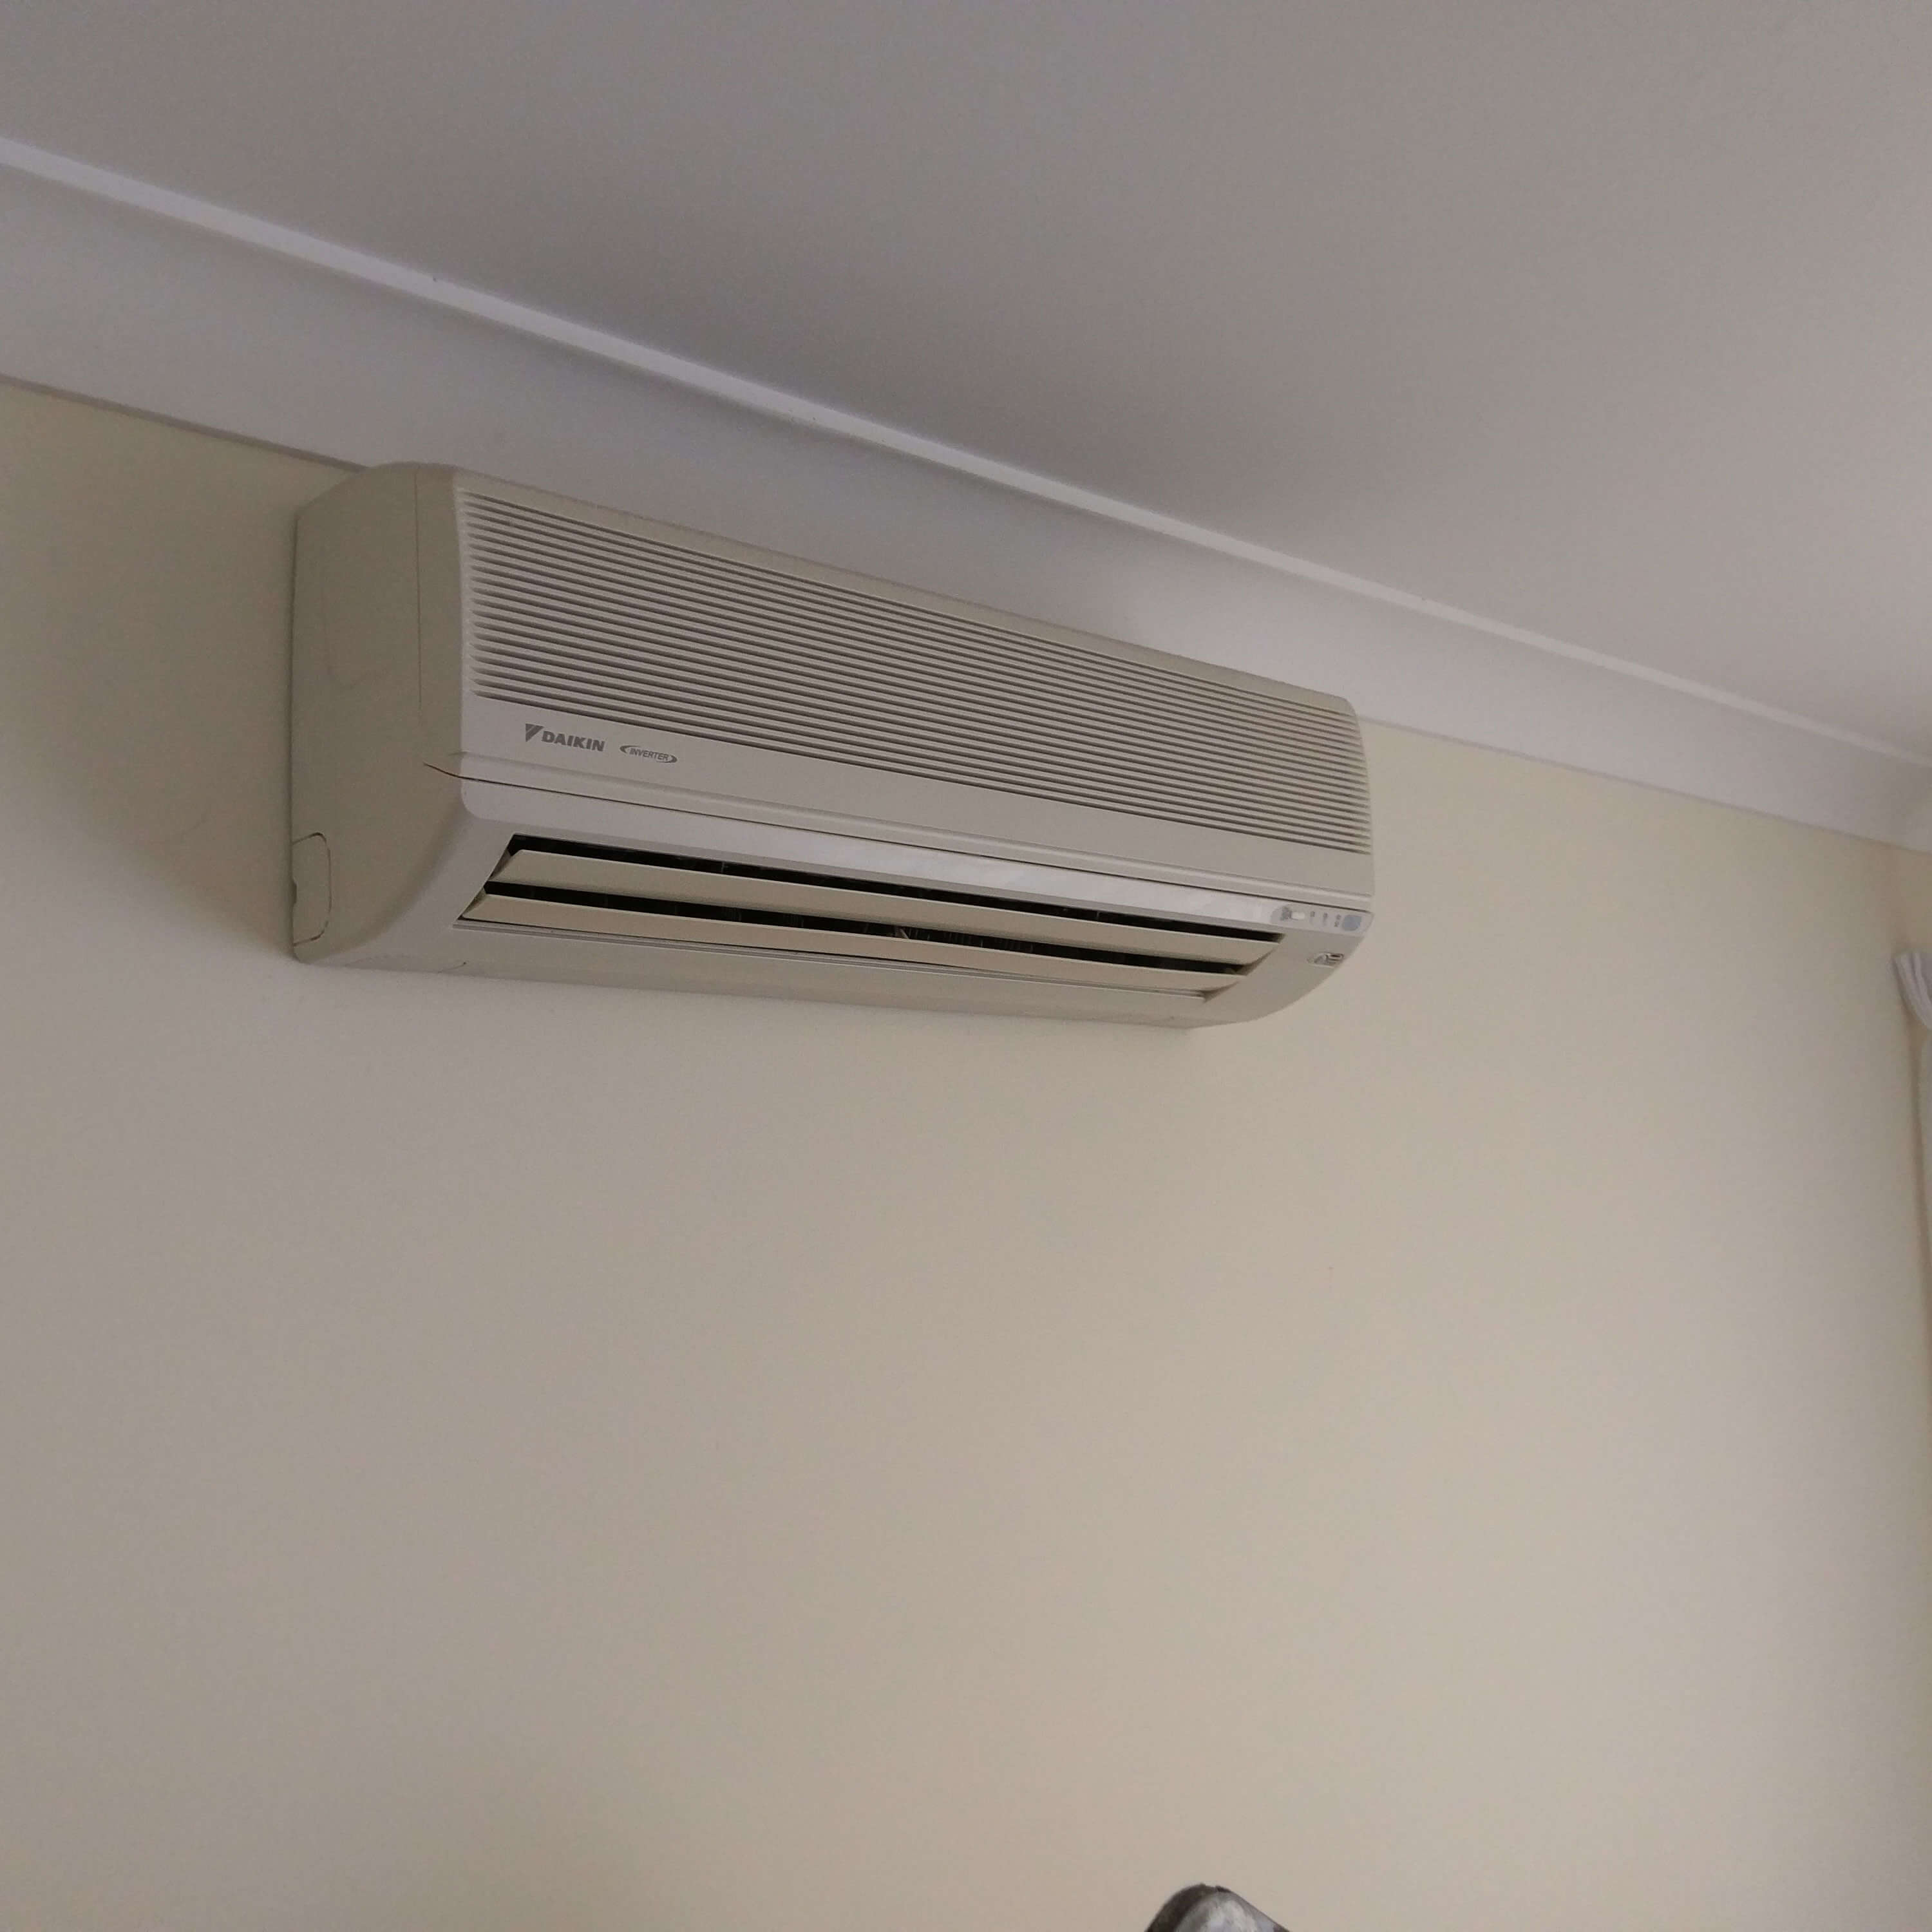 All districts air conditioning hervey Bay sales gallery image 5